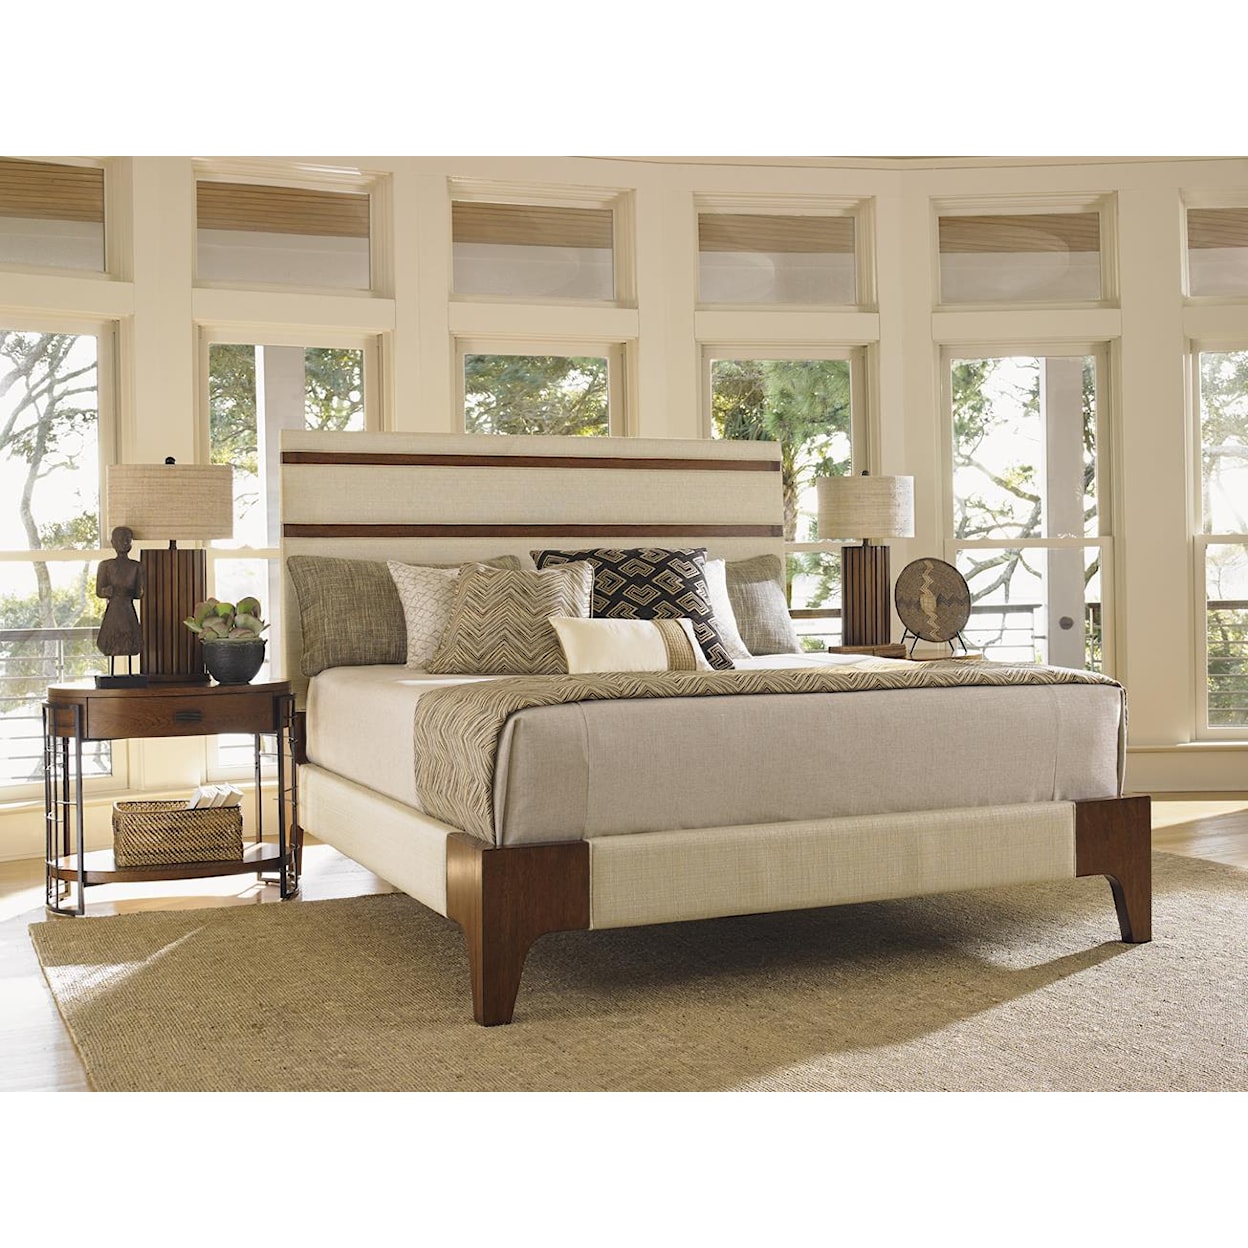 Tommy Bahama Home Island Fusion Queen Bedroom Group